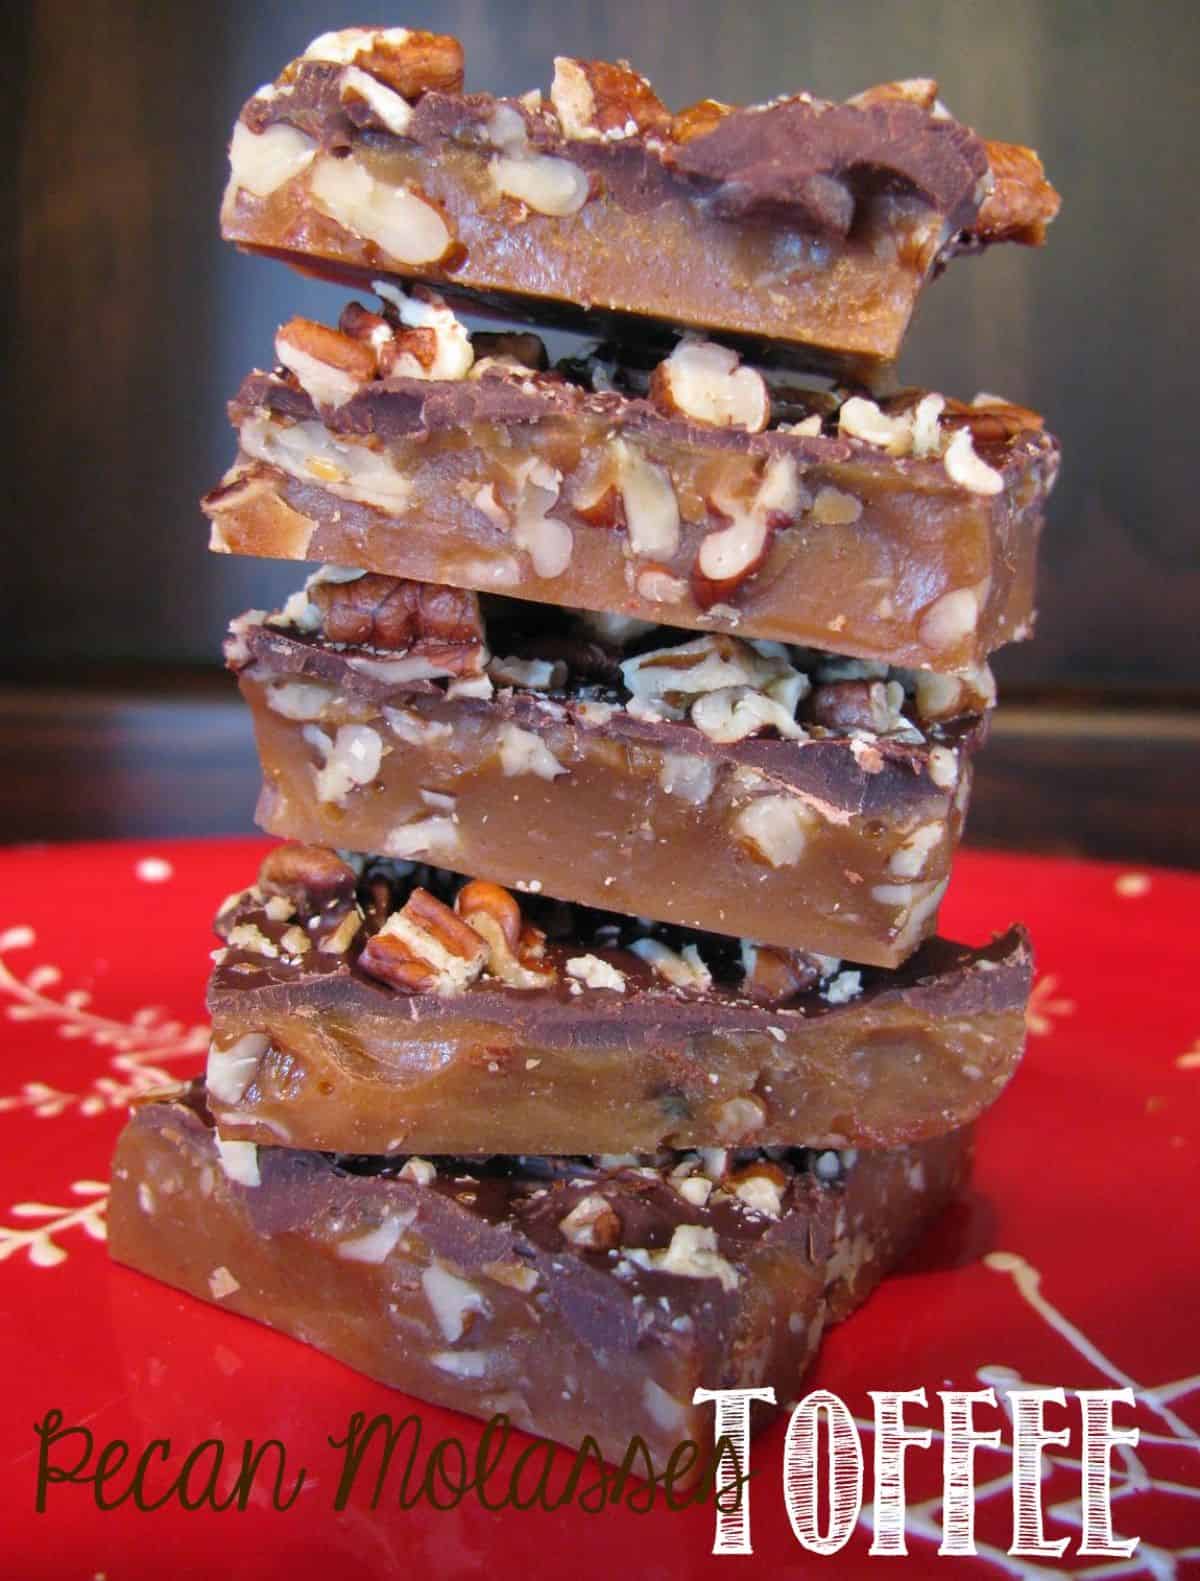 A stack of Pecan Molasses Toffee on a red plate.